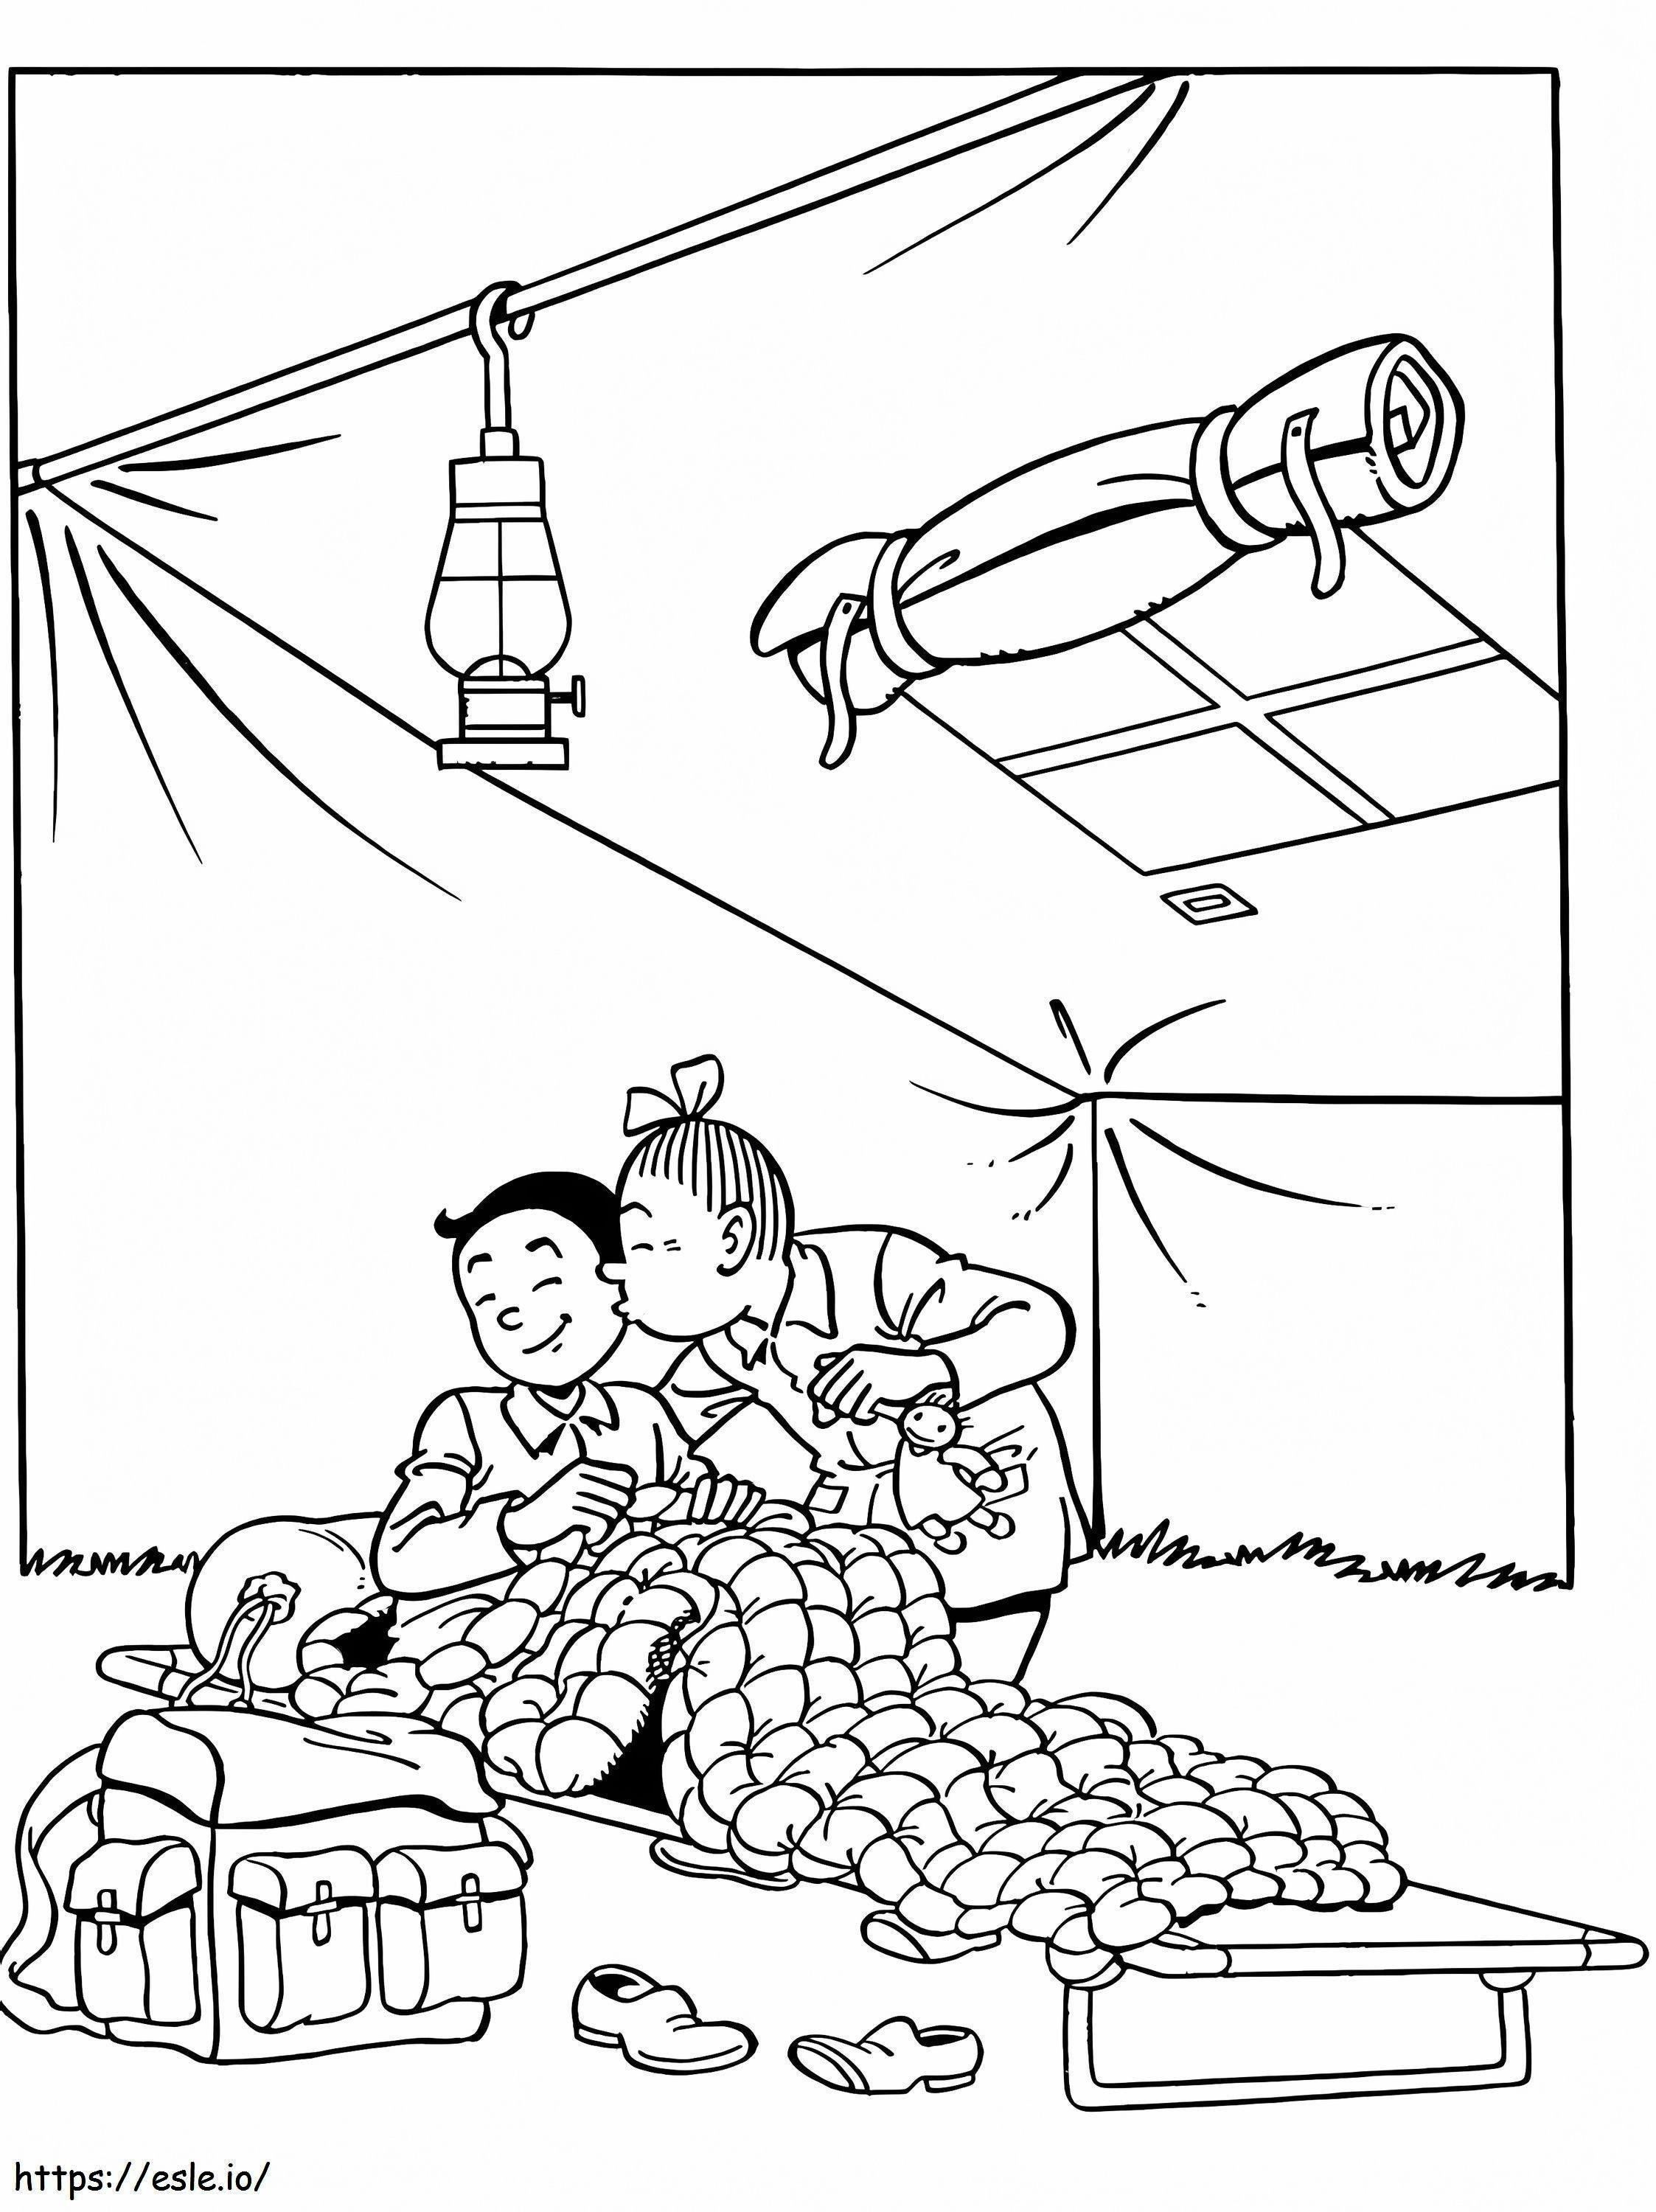 Spike And Suzy 1 coloring page